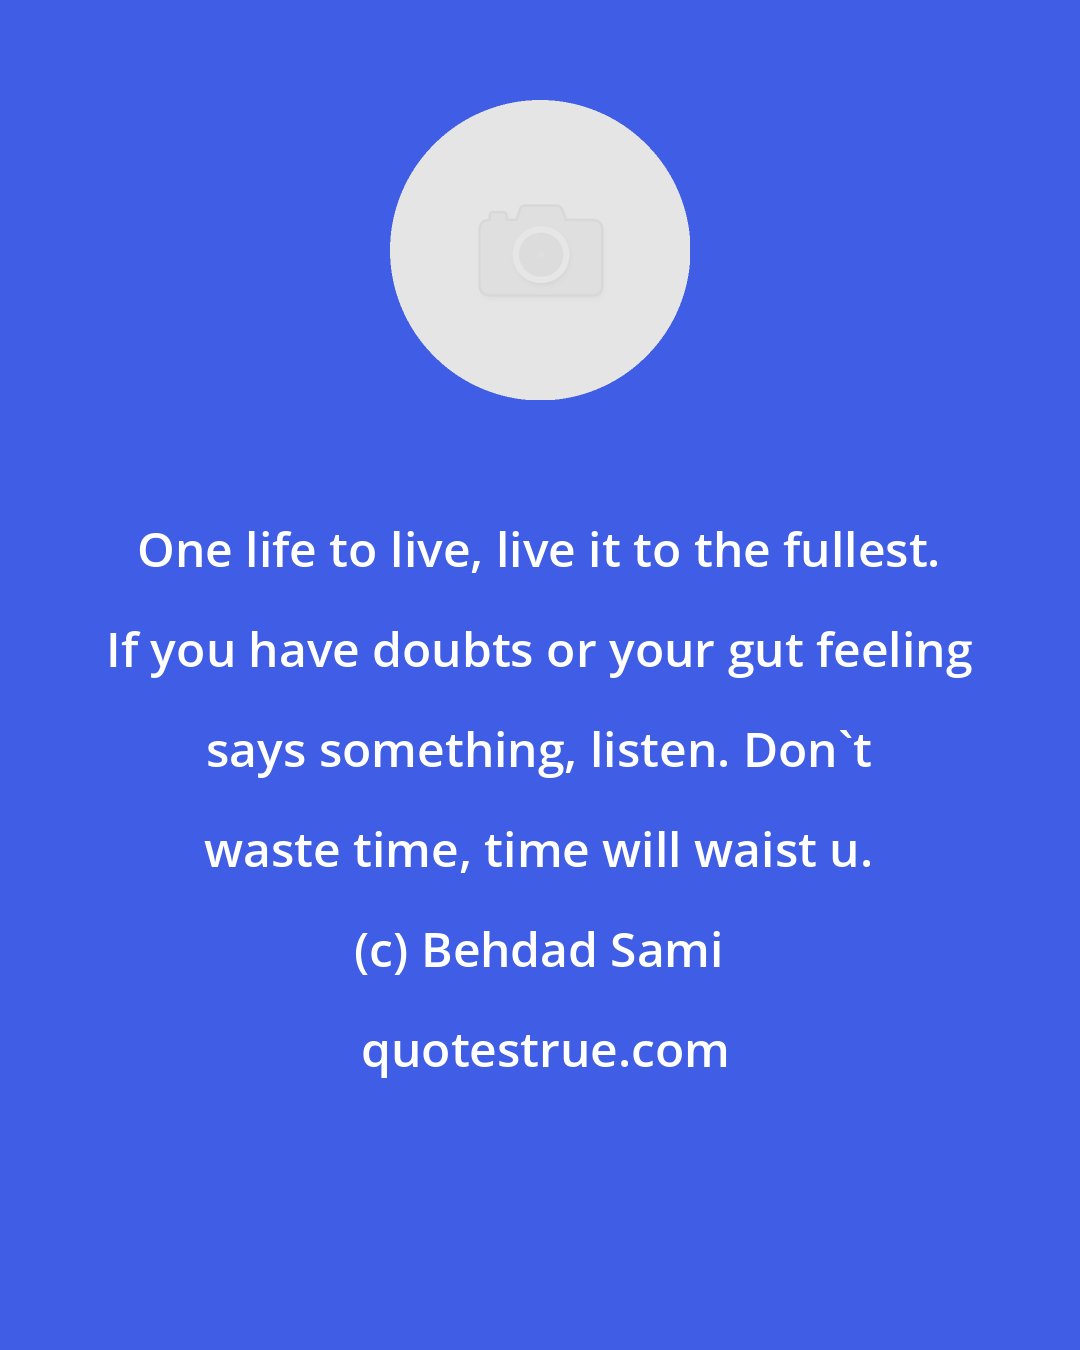 Behdad Sami: One life to live, live it to the fullest. If you have doubts or your gut feeling says something, listen. Don't waste time, time will waist u.